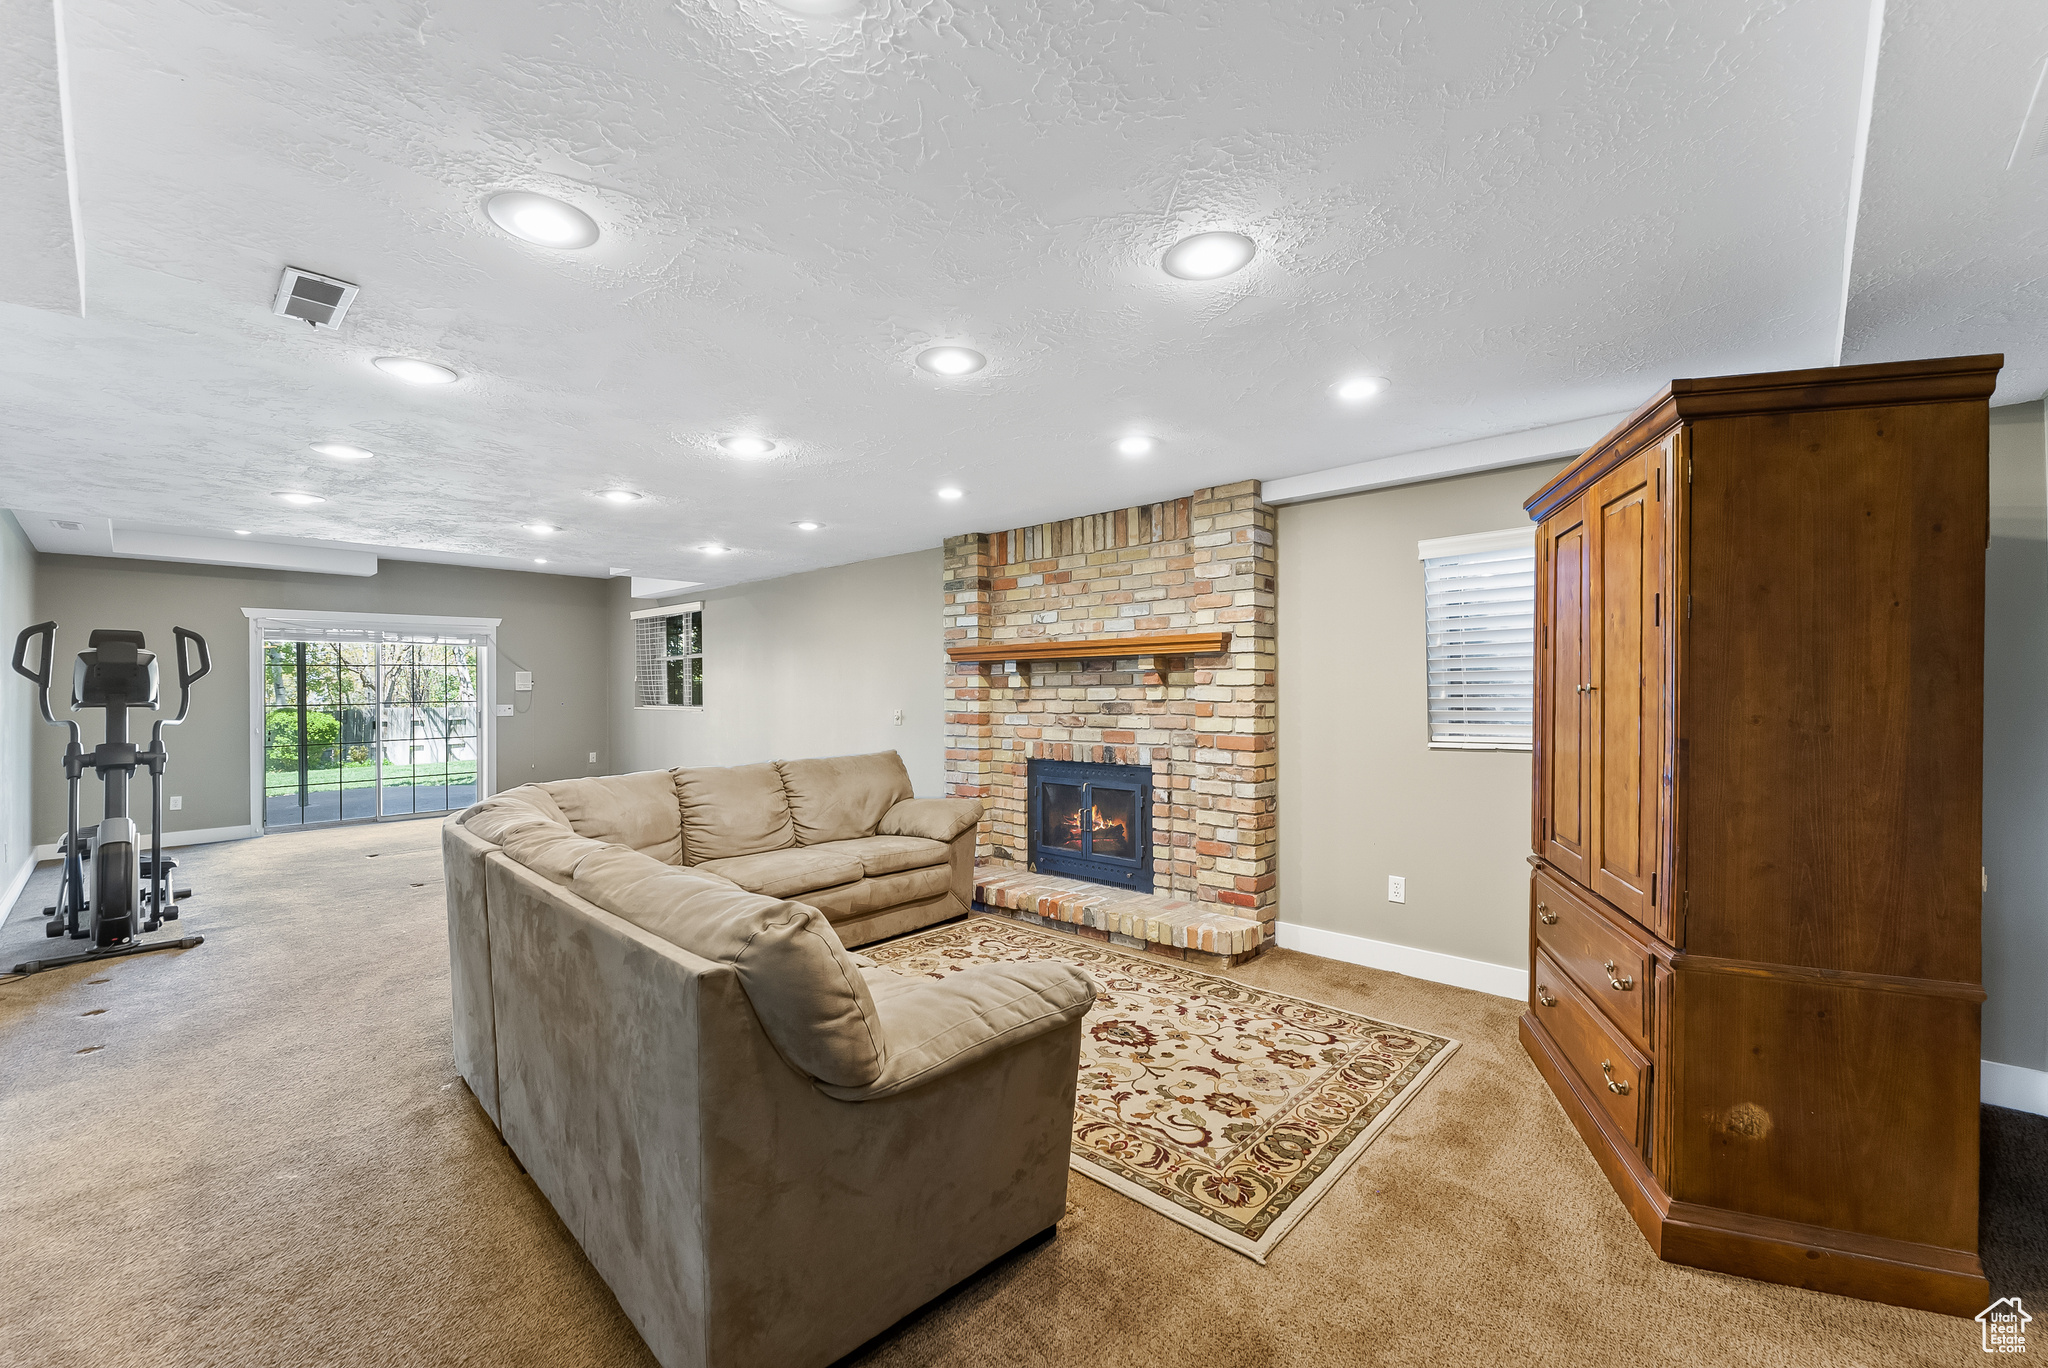 Lower level large family room with inviting fireplace and walkout to backyard